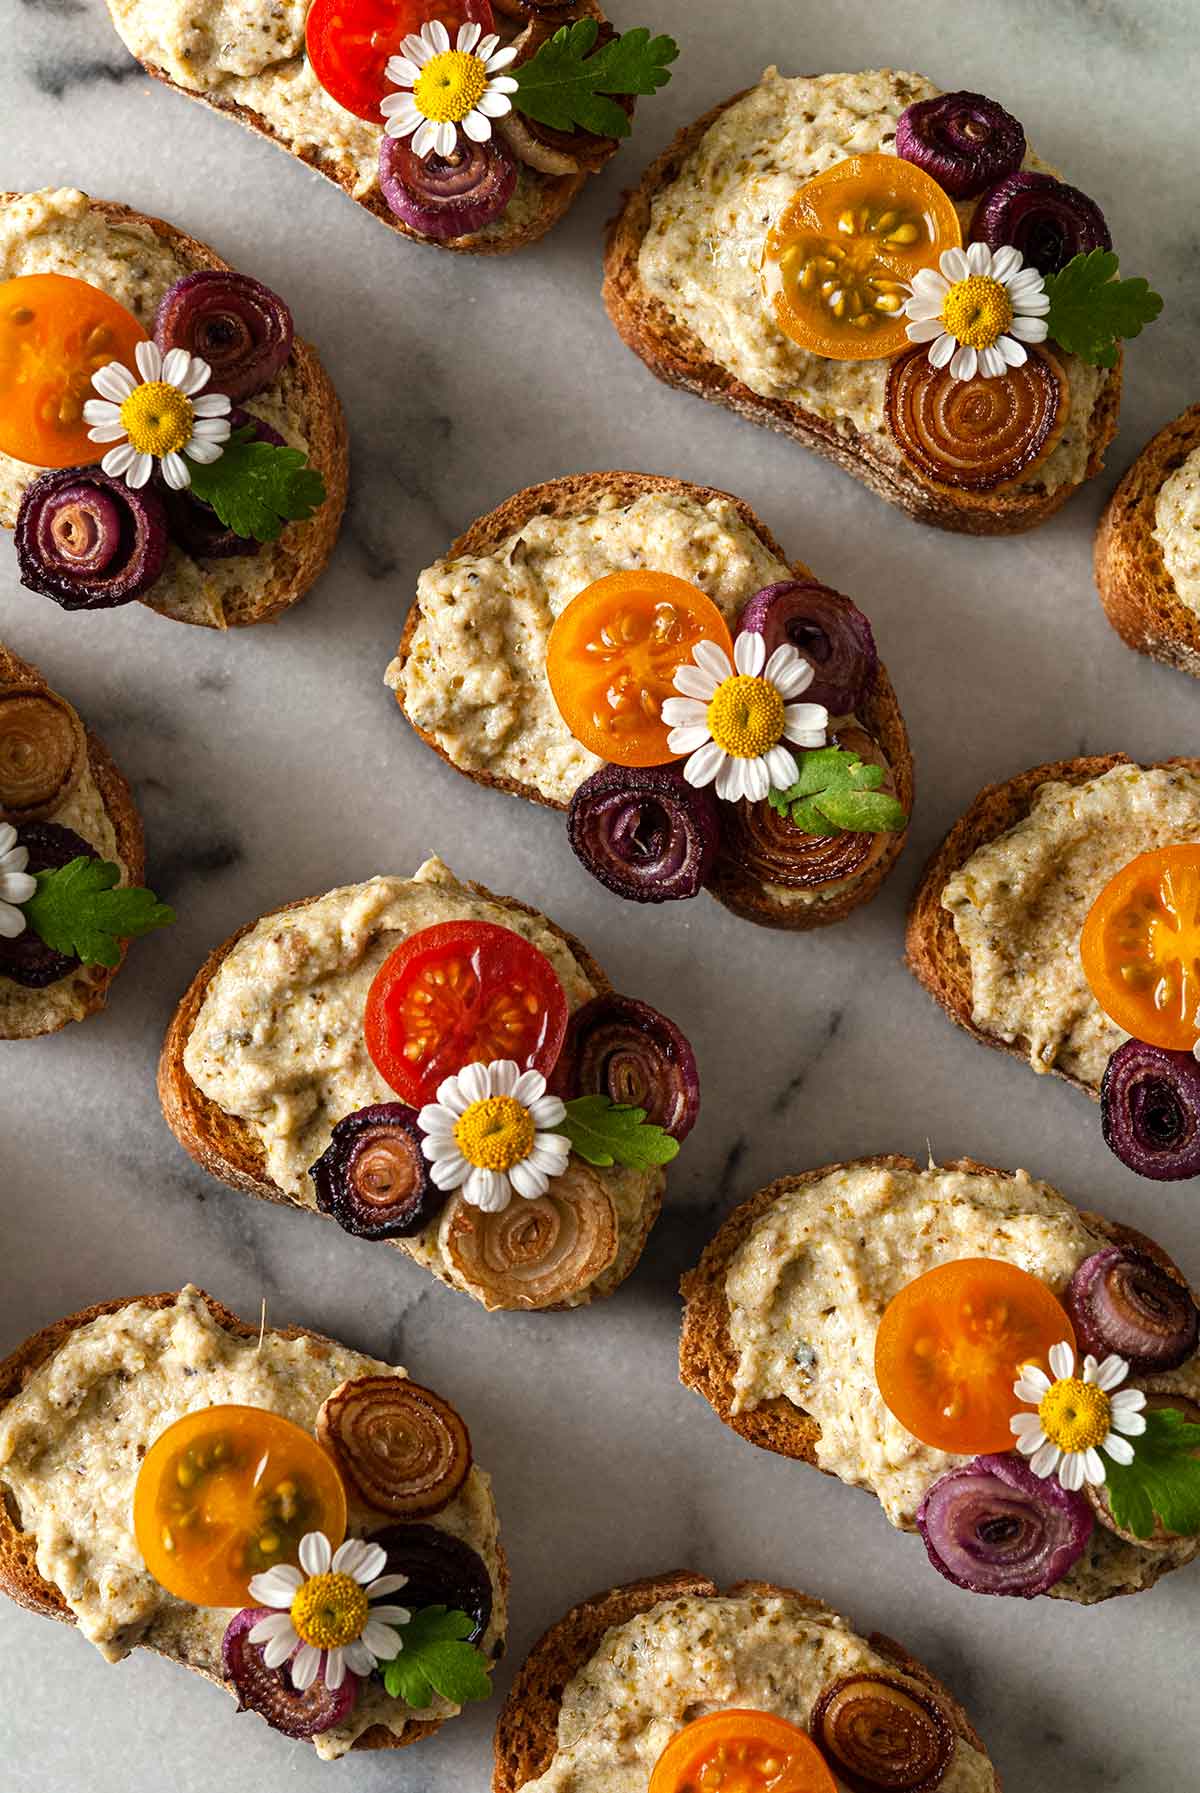 11 crostini garnished with daisies, onions and tomatoes on a marble plate.